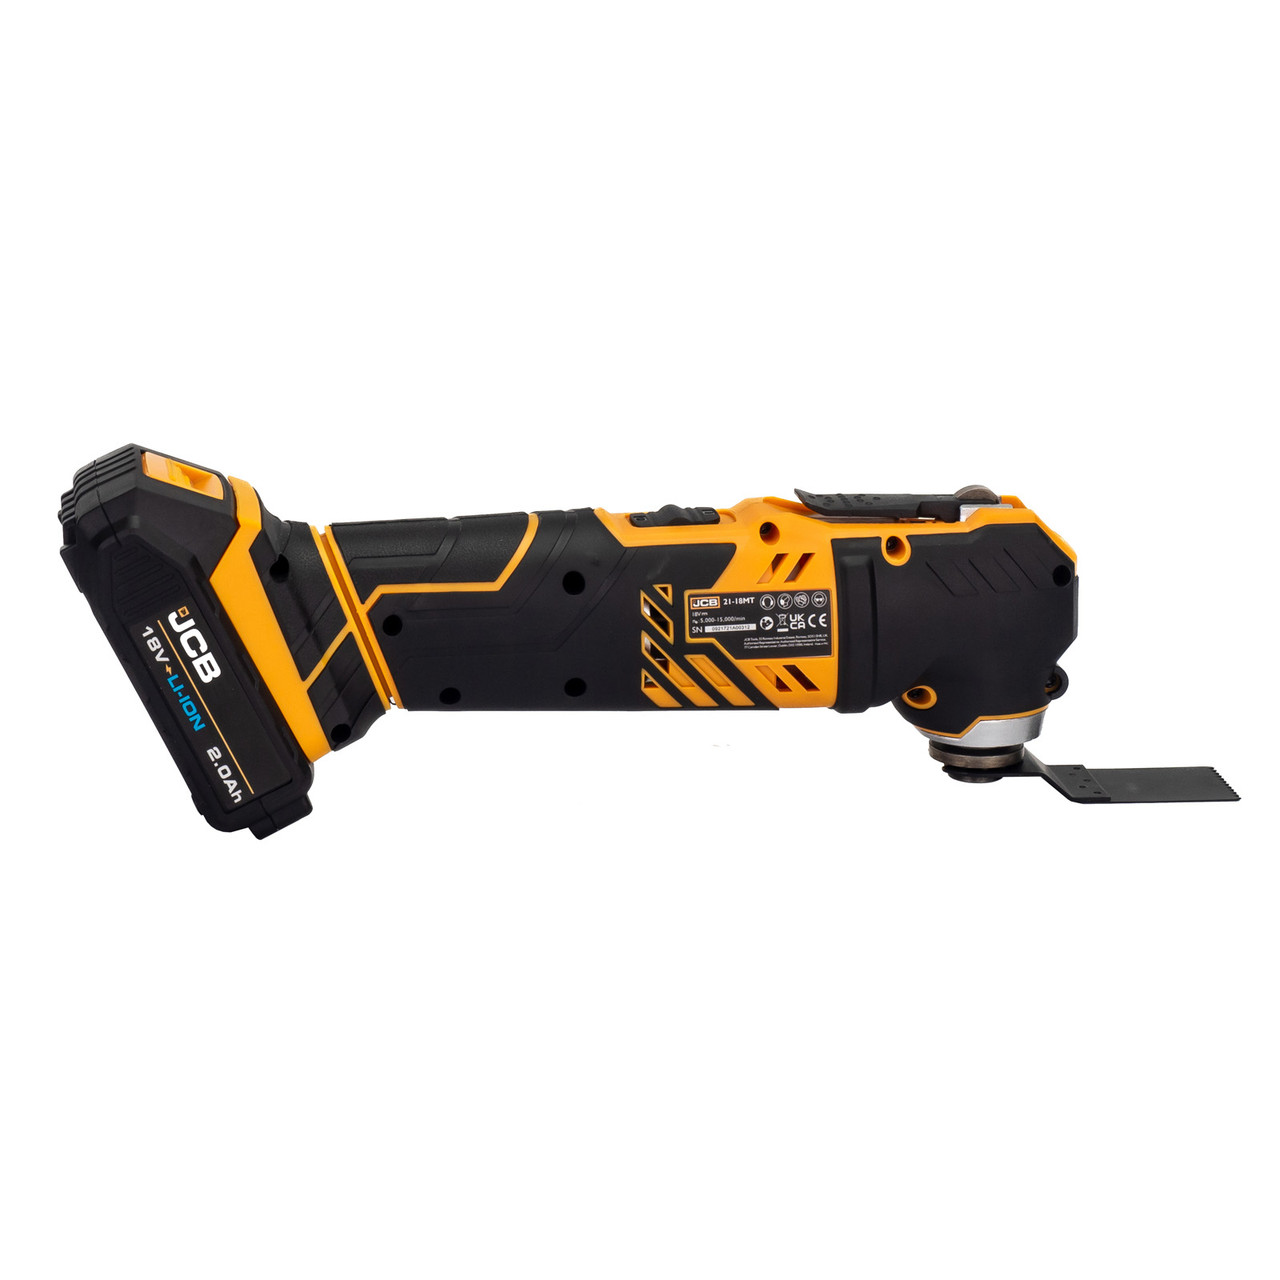 18V Cordless Oscillating Multi-Tool with 2.0 Ah Battery and Charger - 2